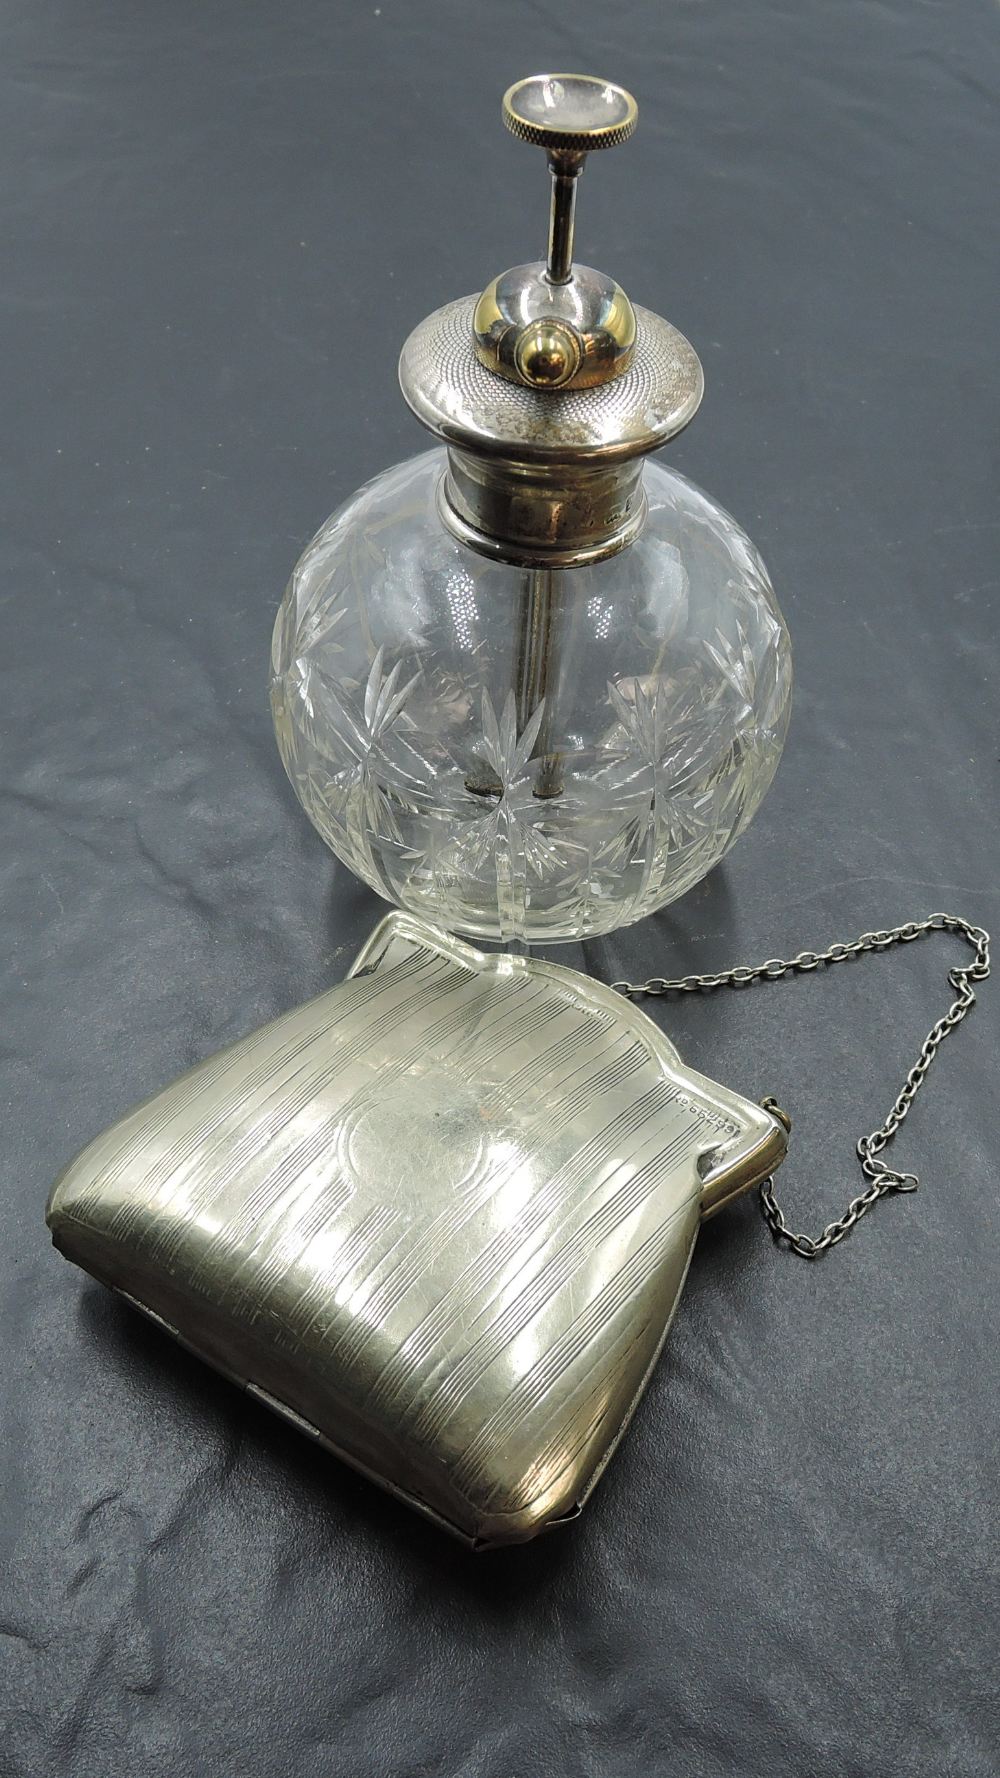 A silver mounted cut glass perfume atomizer, with brass pump and nozzle over the engine turned